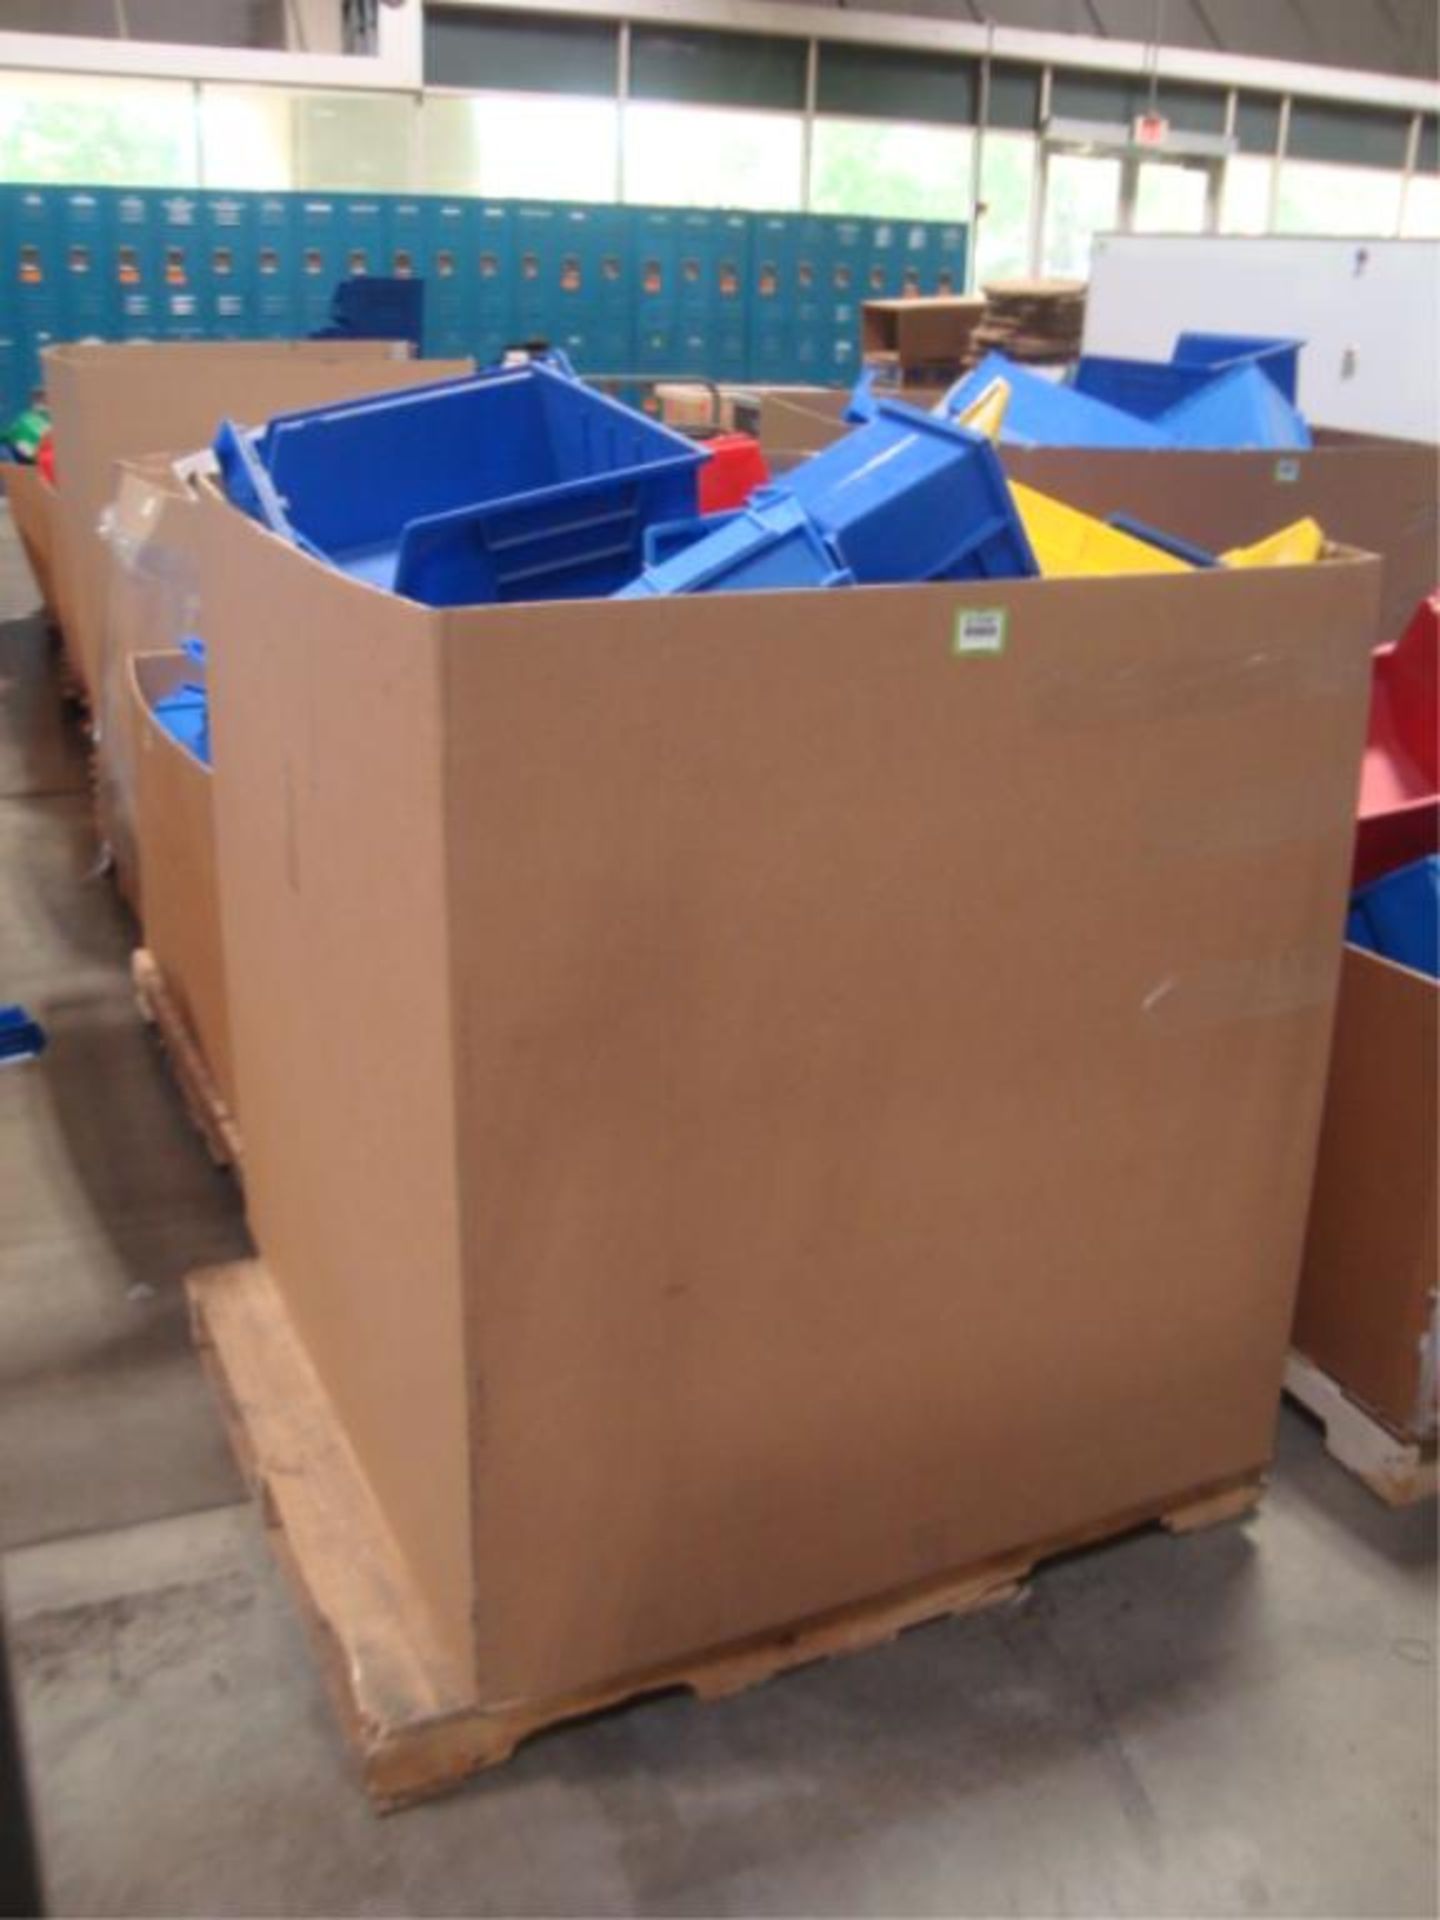 Parts Storage Totes - Image 2 of 6